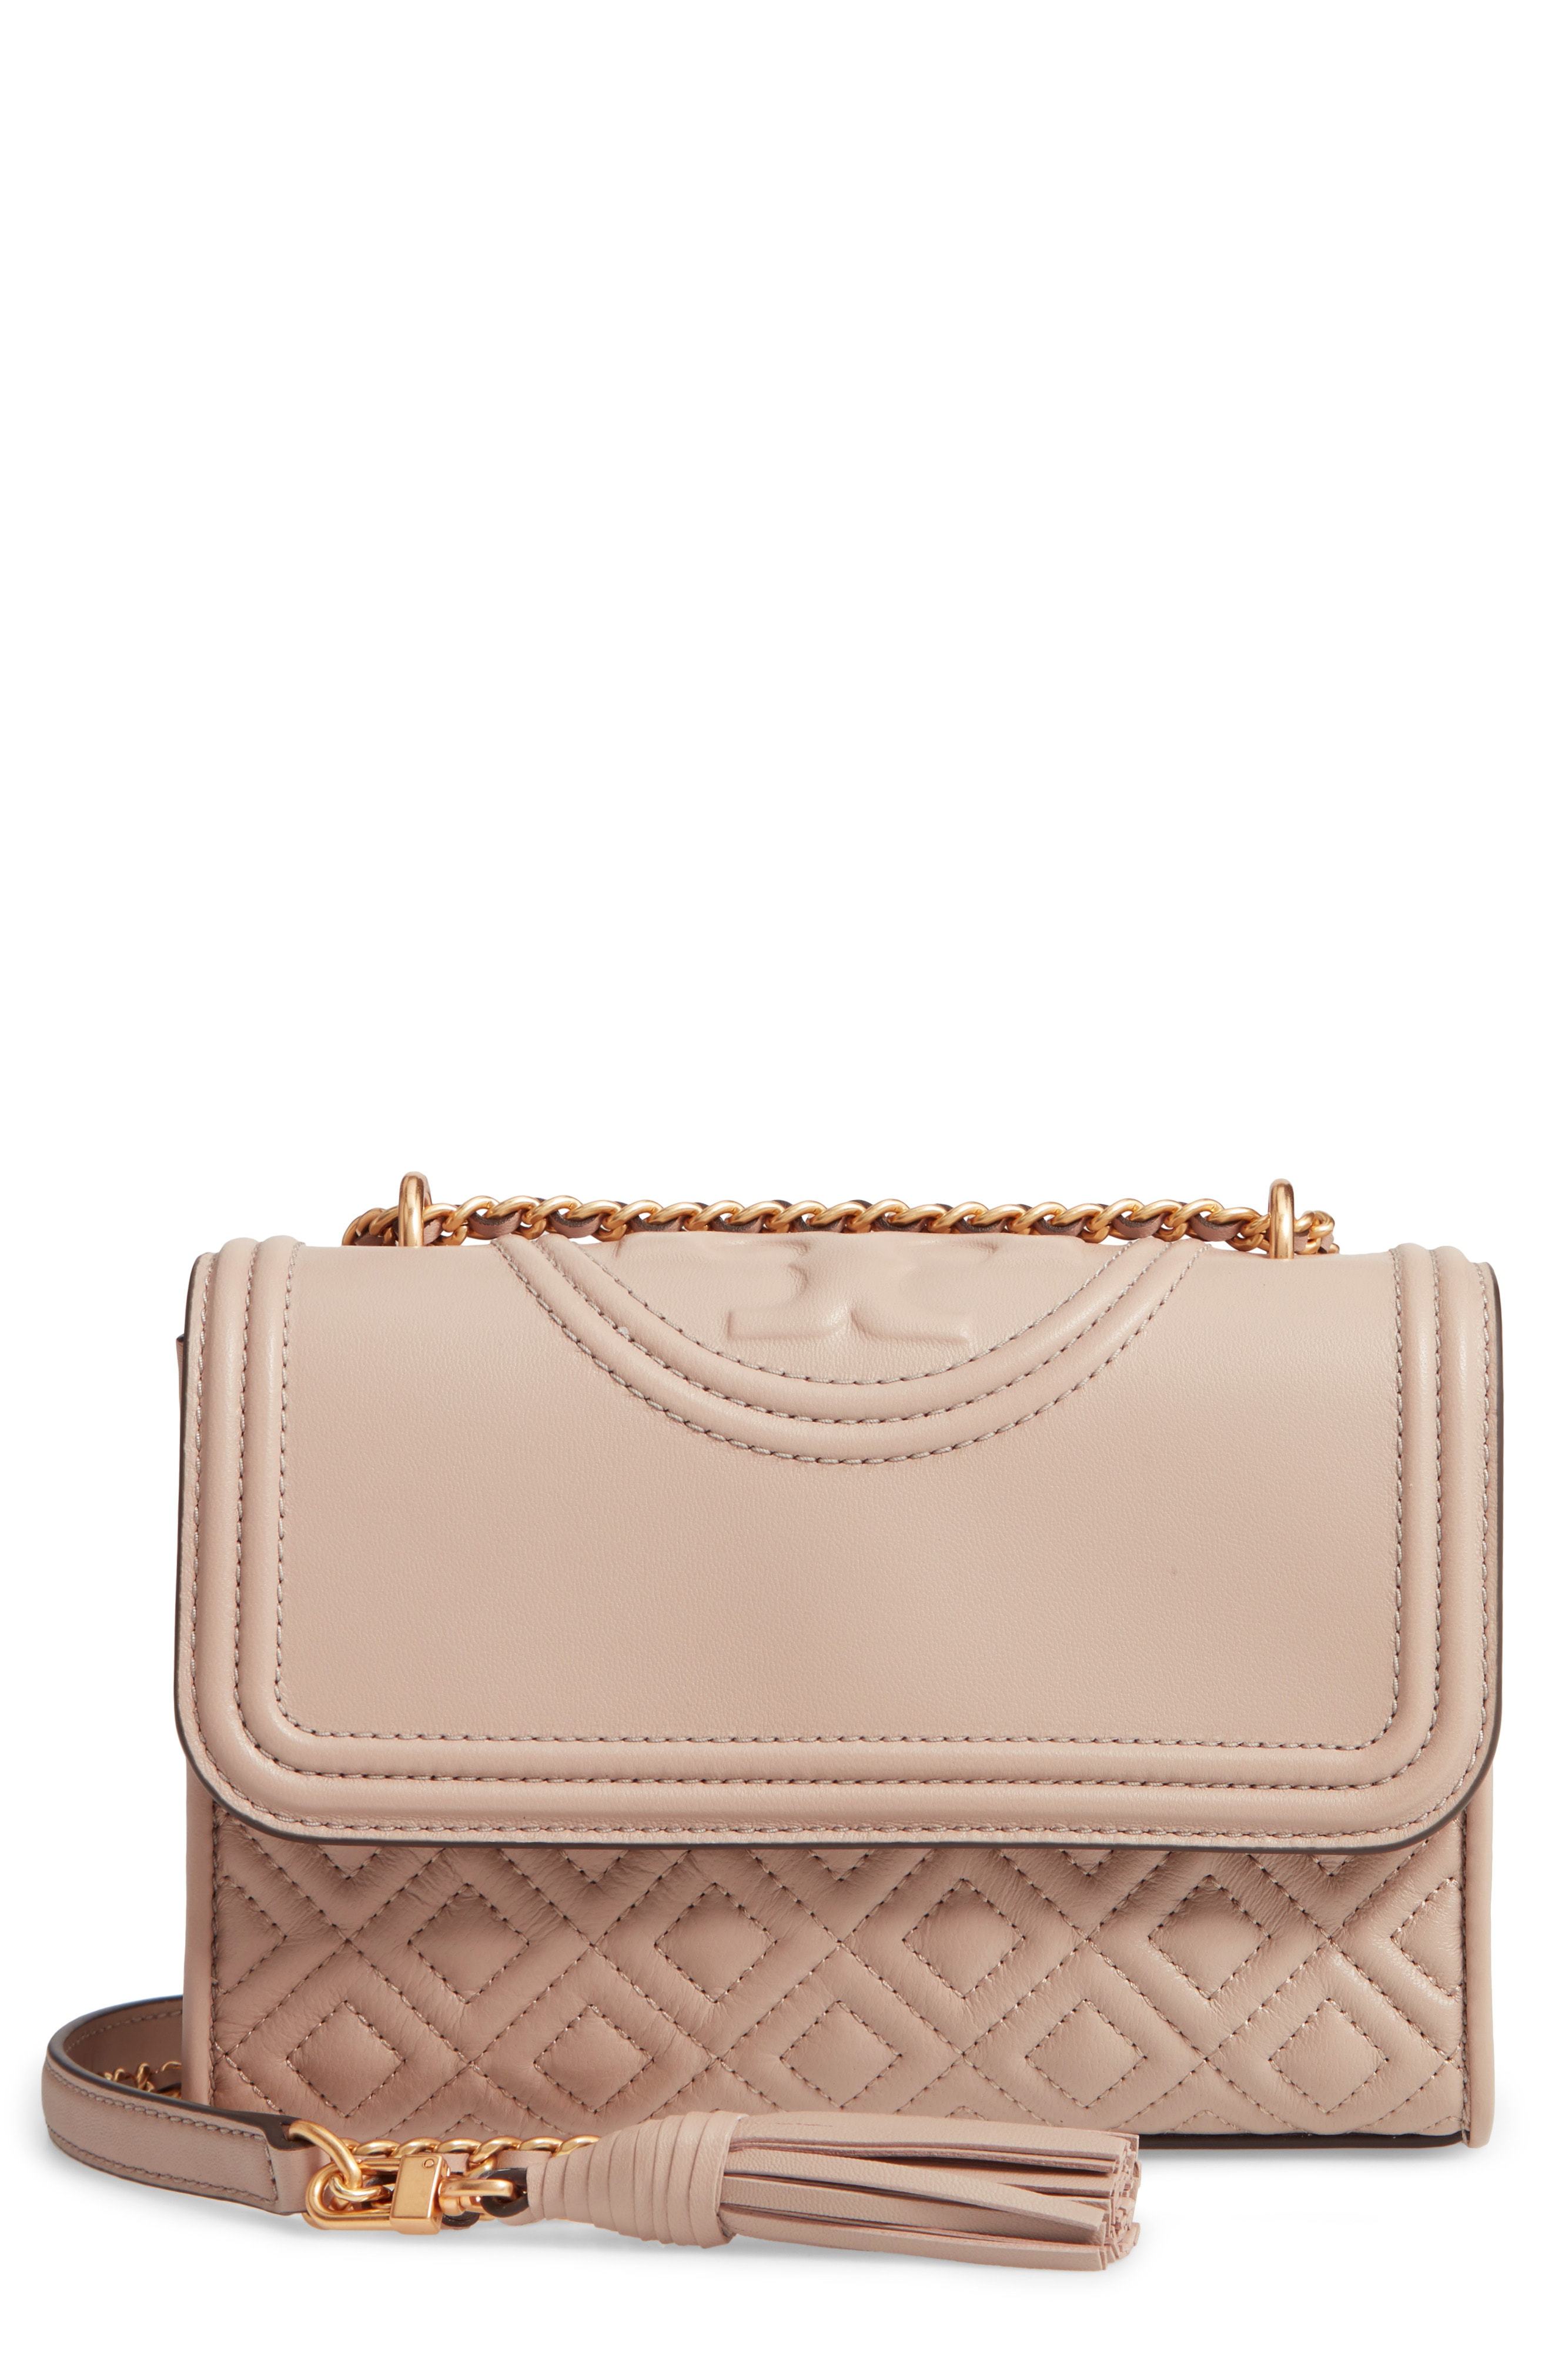 Tory Burch Small Fleming Leather Convertible Shoulder Bag, $458 | Nordstrom  | Lookastic